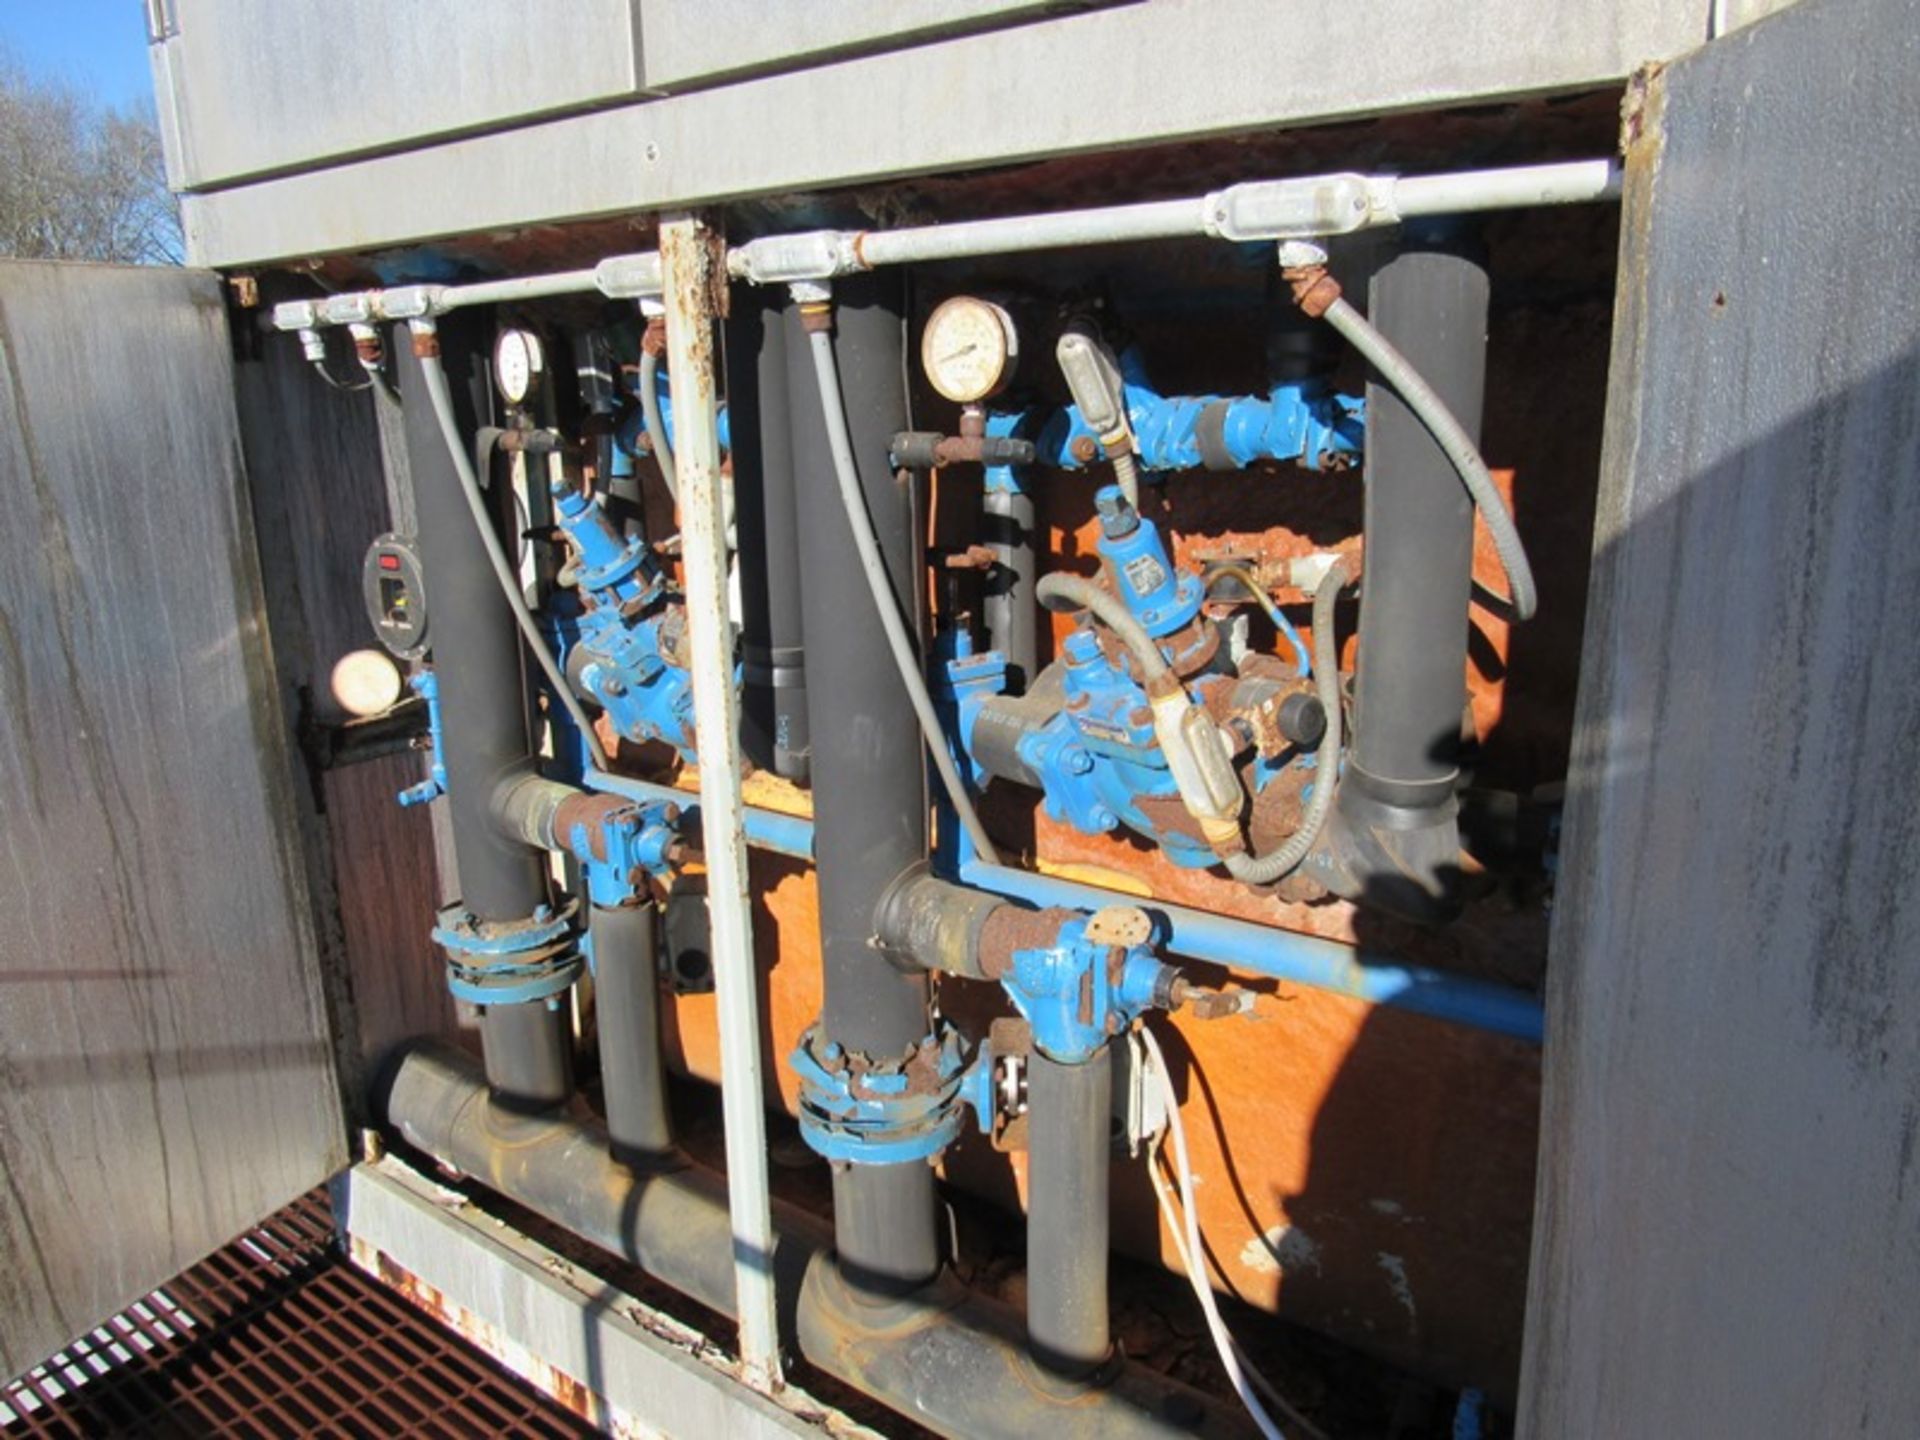 Turbo Mdl. Tigar 36-20 Ammonia Plate Chiller, Ser. #E022030, on roof top structure, 21 plates in - Image 3 of 9